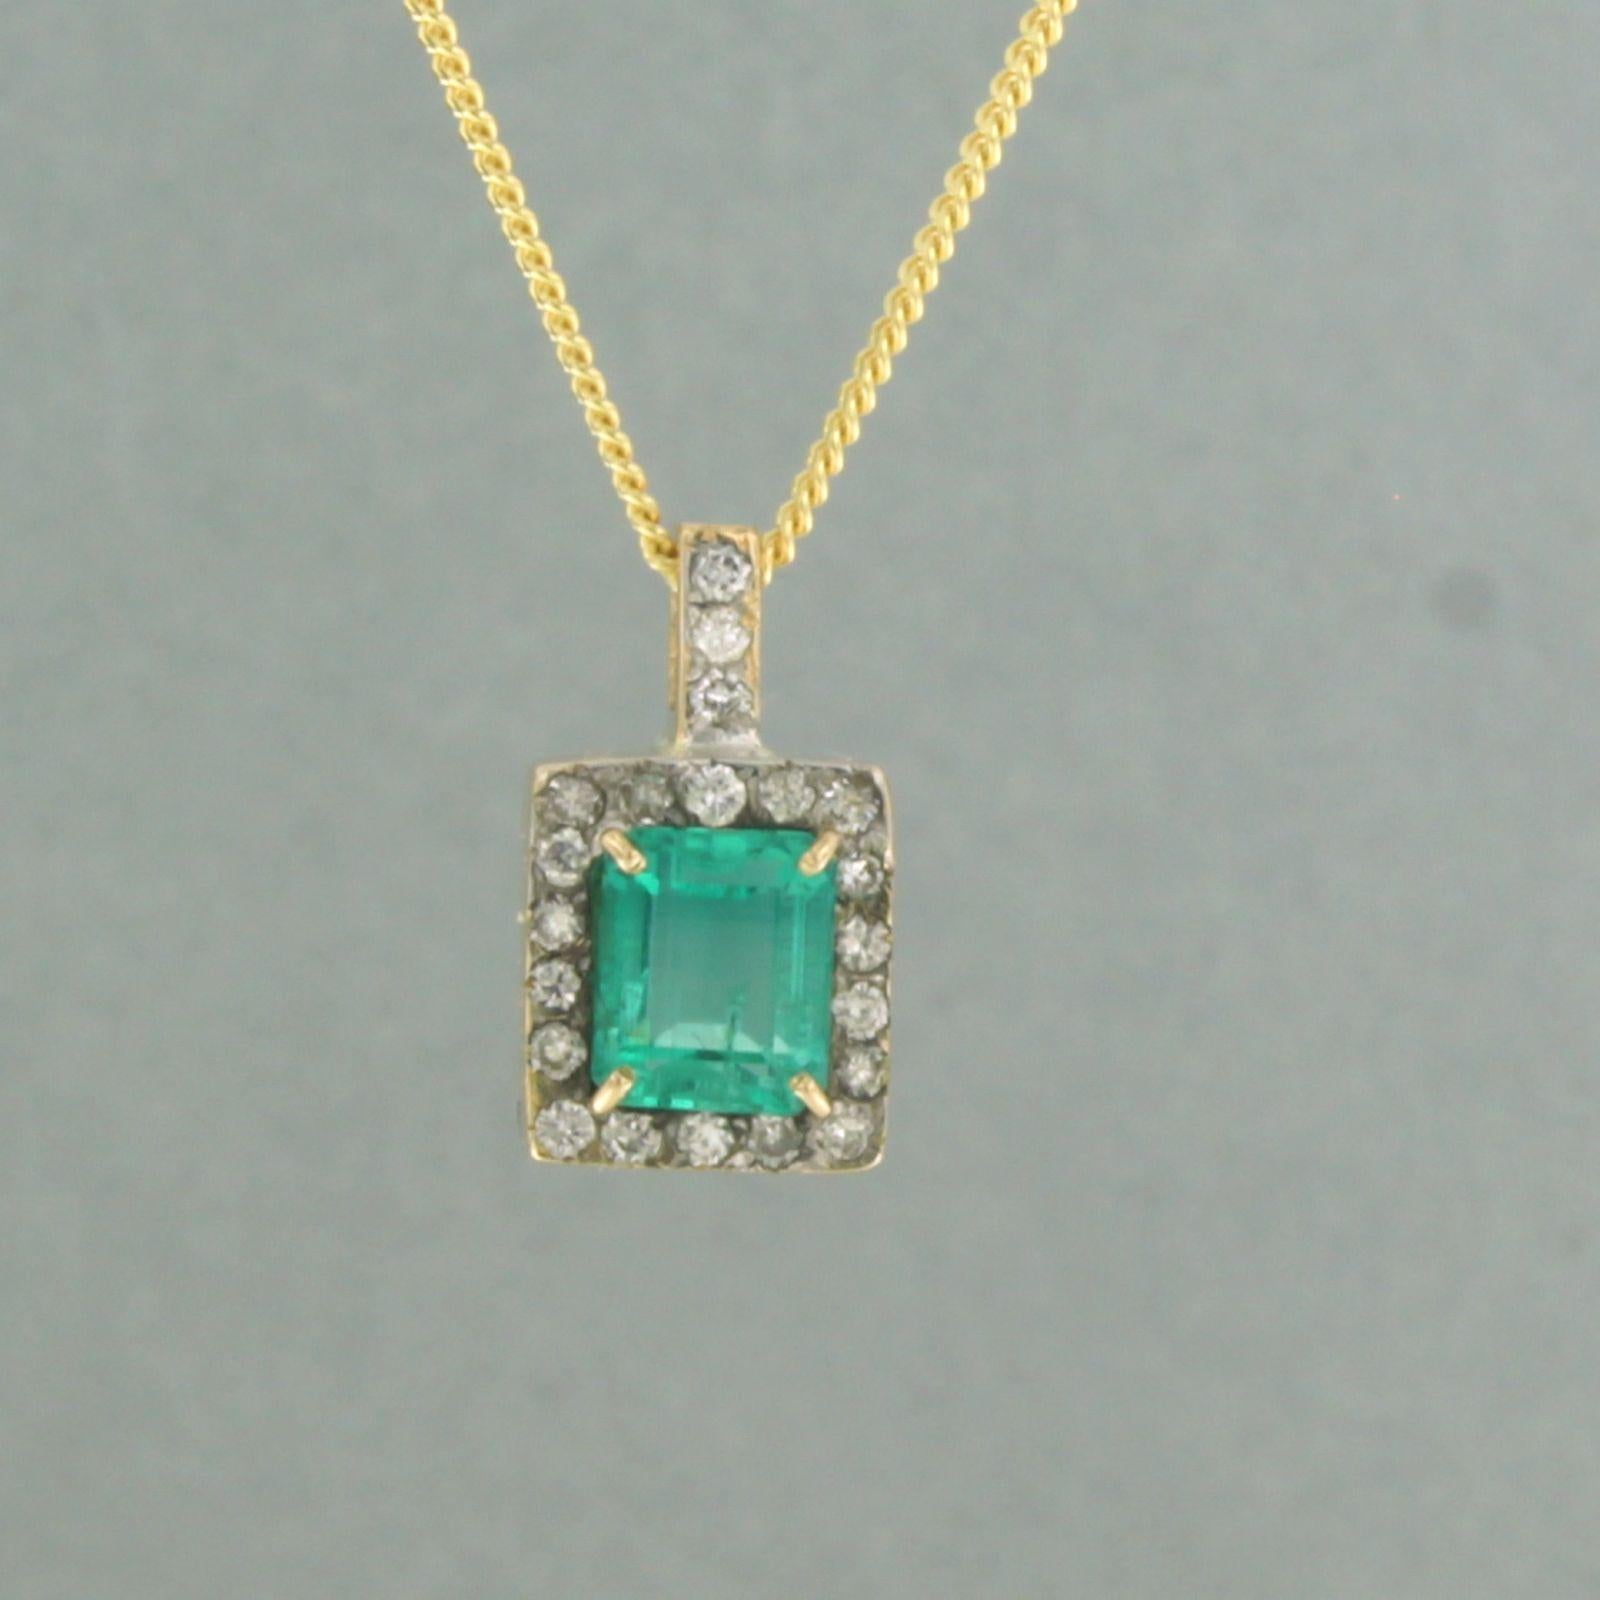 Necklace with pendant set with emerald and diamond 14k yellow gold 1